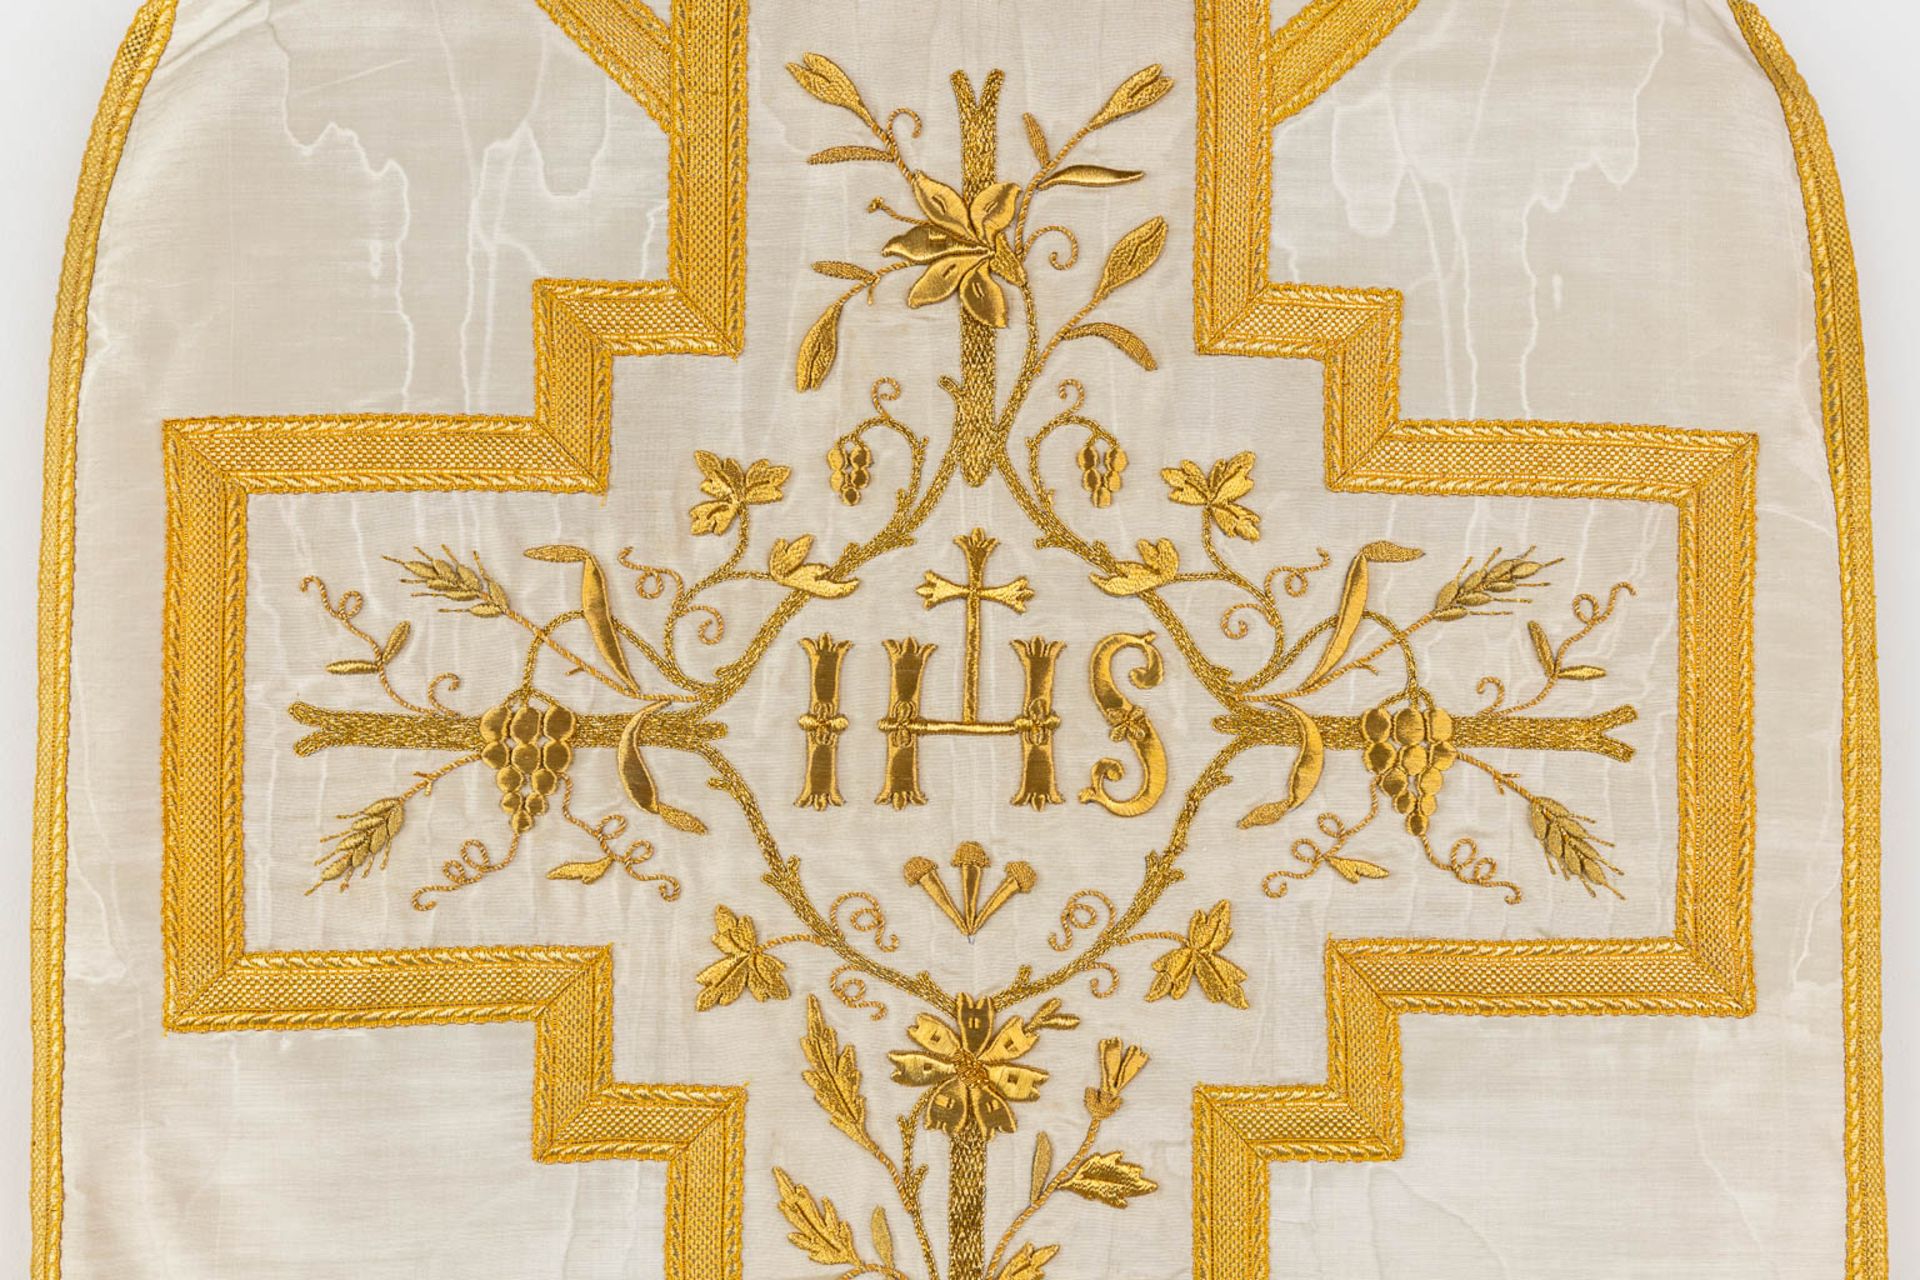 A set of Lithurgical Robes and accessories. Thick gold thread and embroideries. - Image 17 of 40